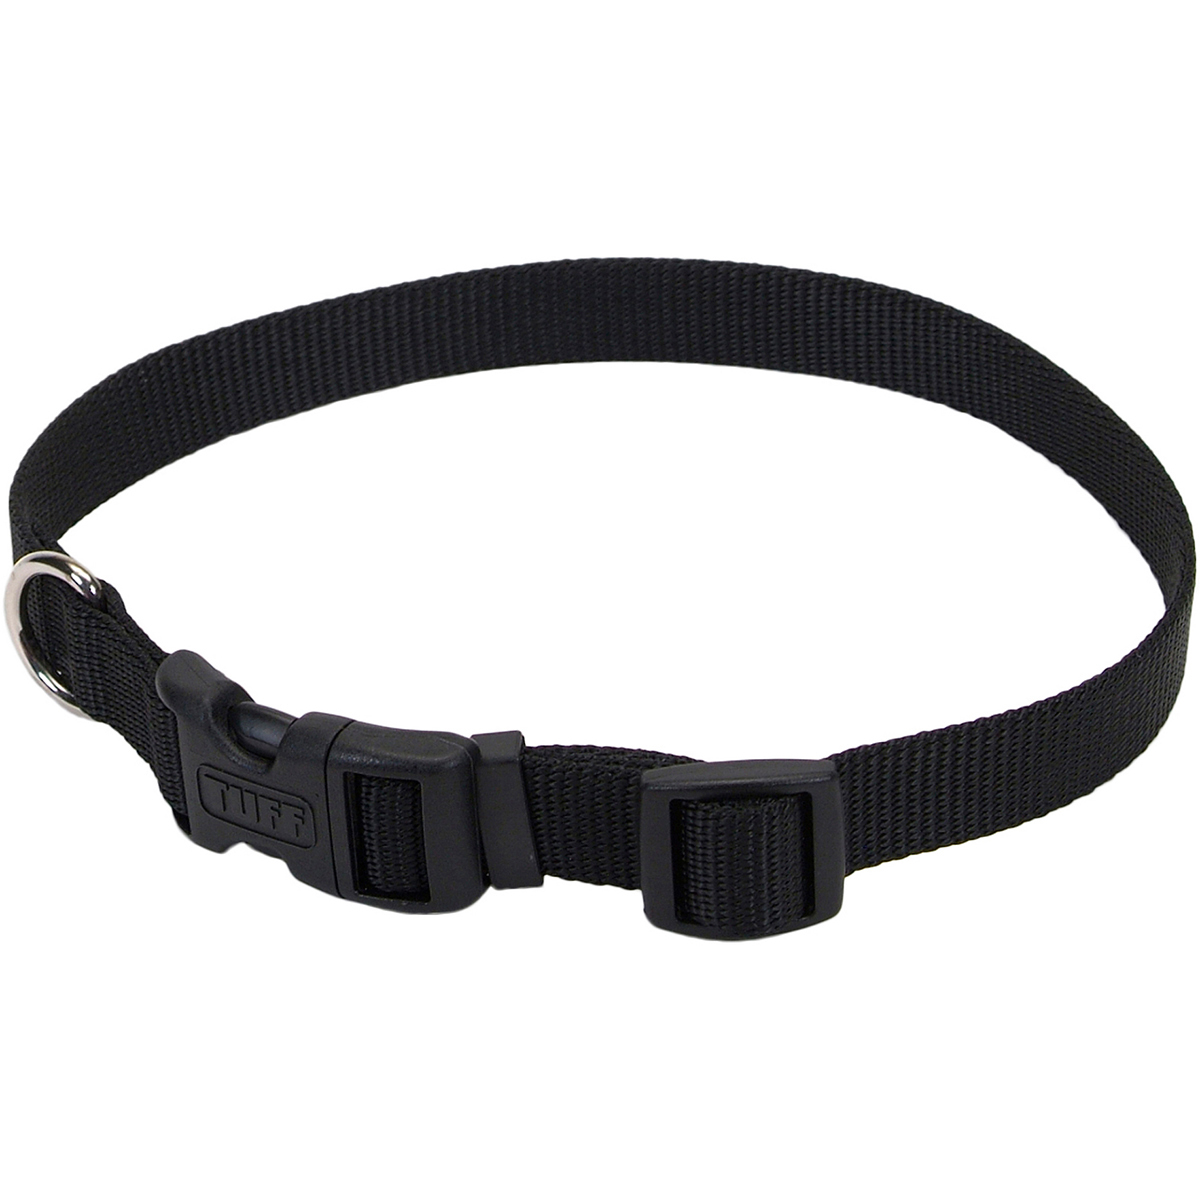 Picture of Coastal Pet Products 06401-BLK14 0.62 x 10 - 14 in. Adjustable Nylon Dog Collar with Tuff Buckle, Black